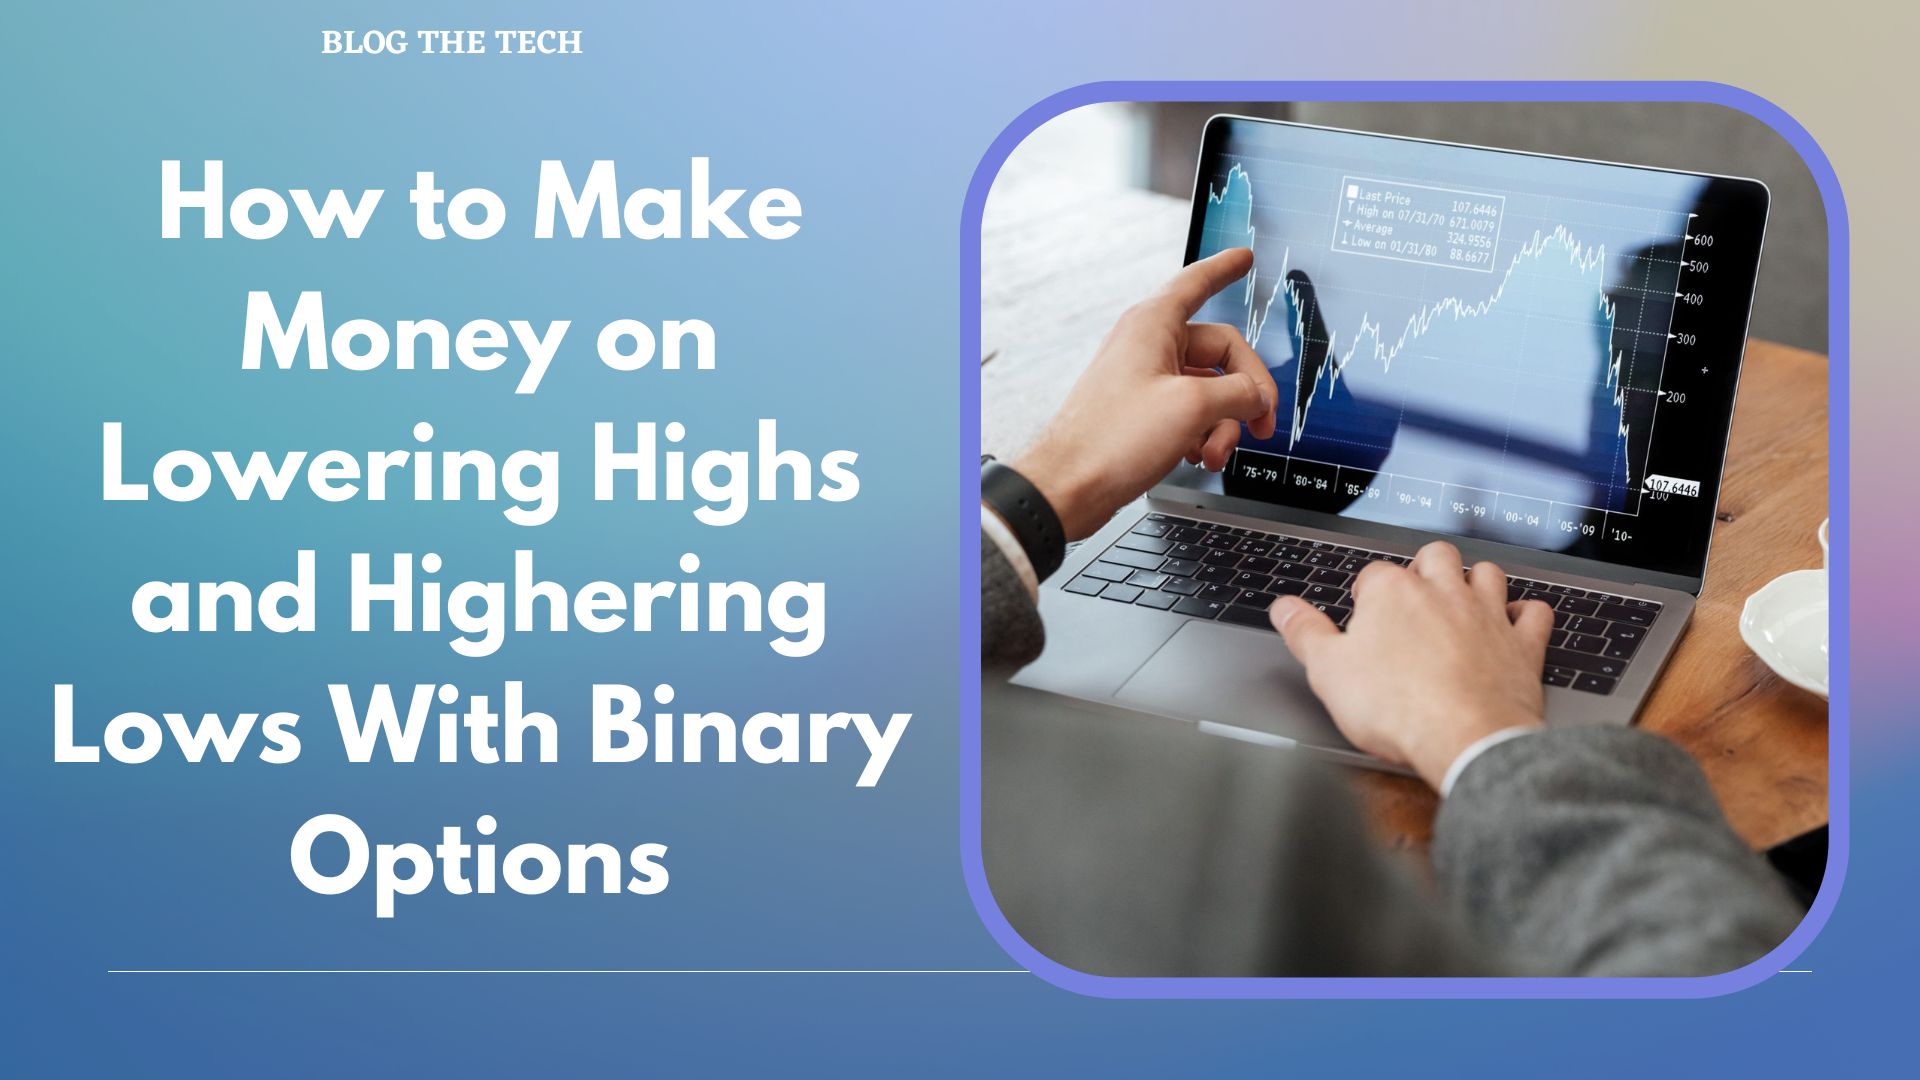 How to Make Money on Lowering Highs and Highering Lows With Binary Options